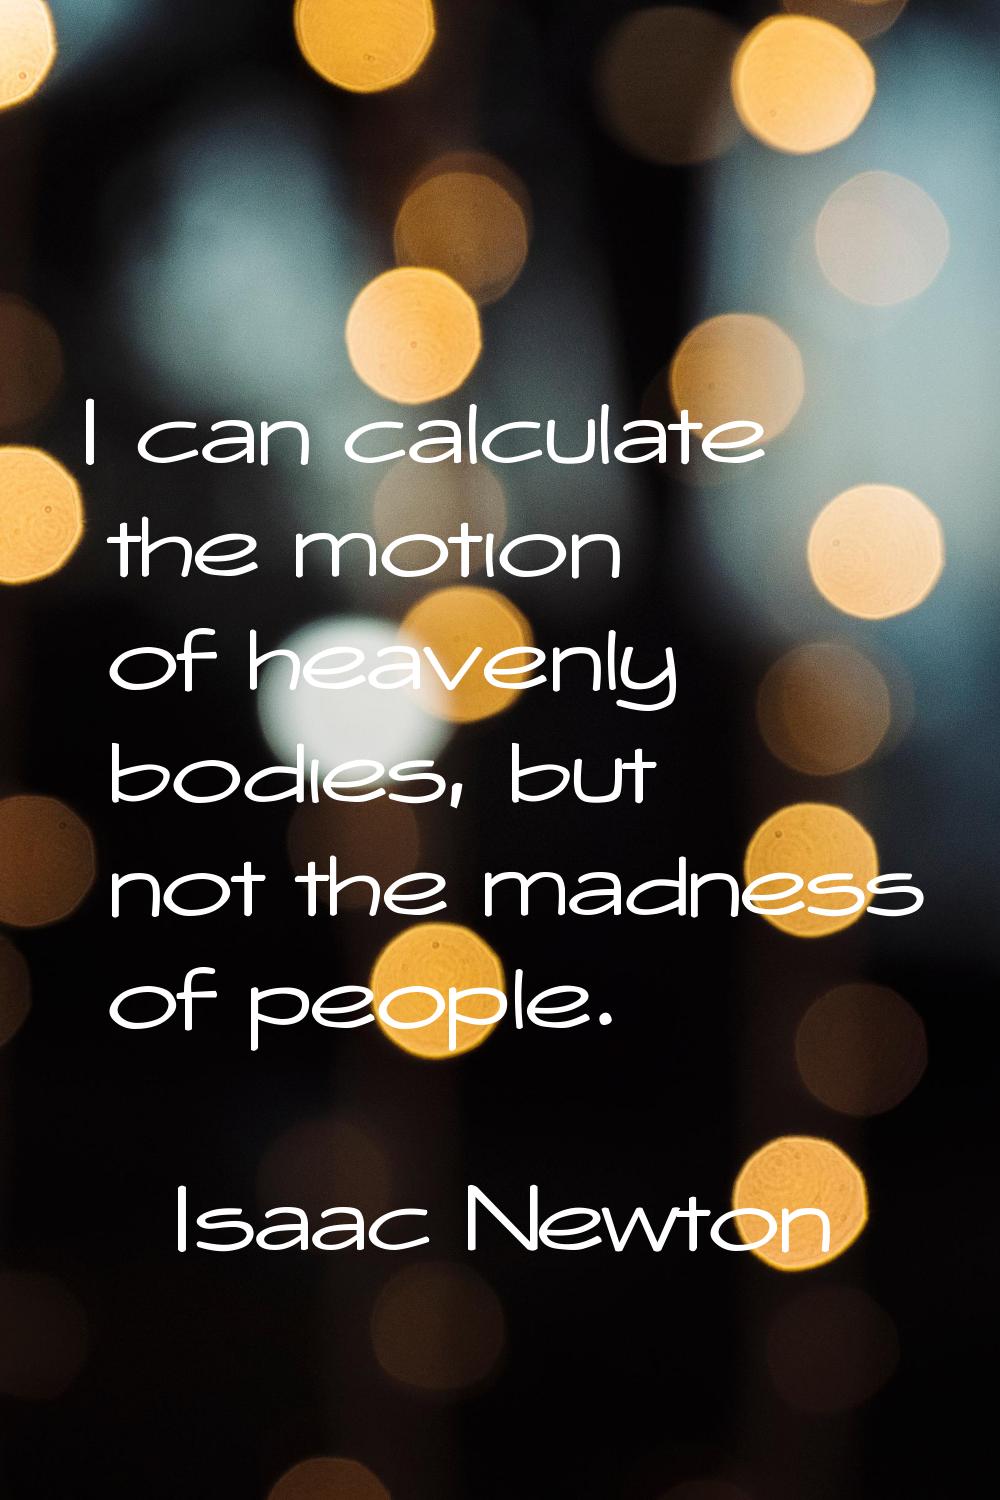 I can calculate the motion of heavenly bodies, but not the madness of people.